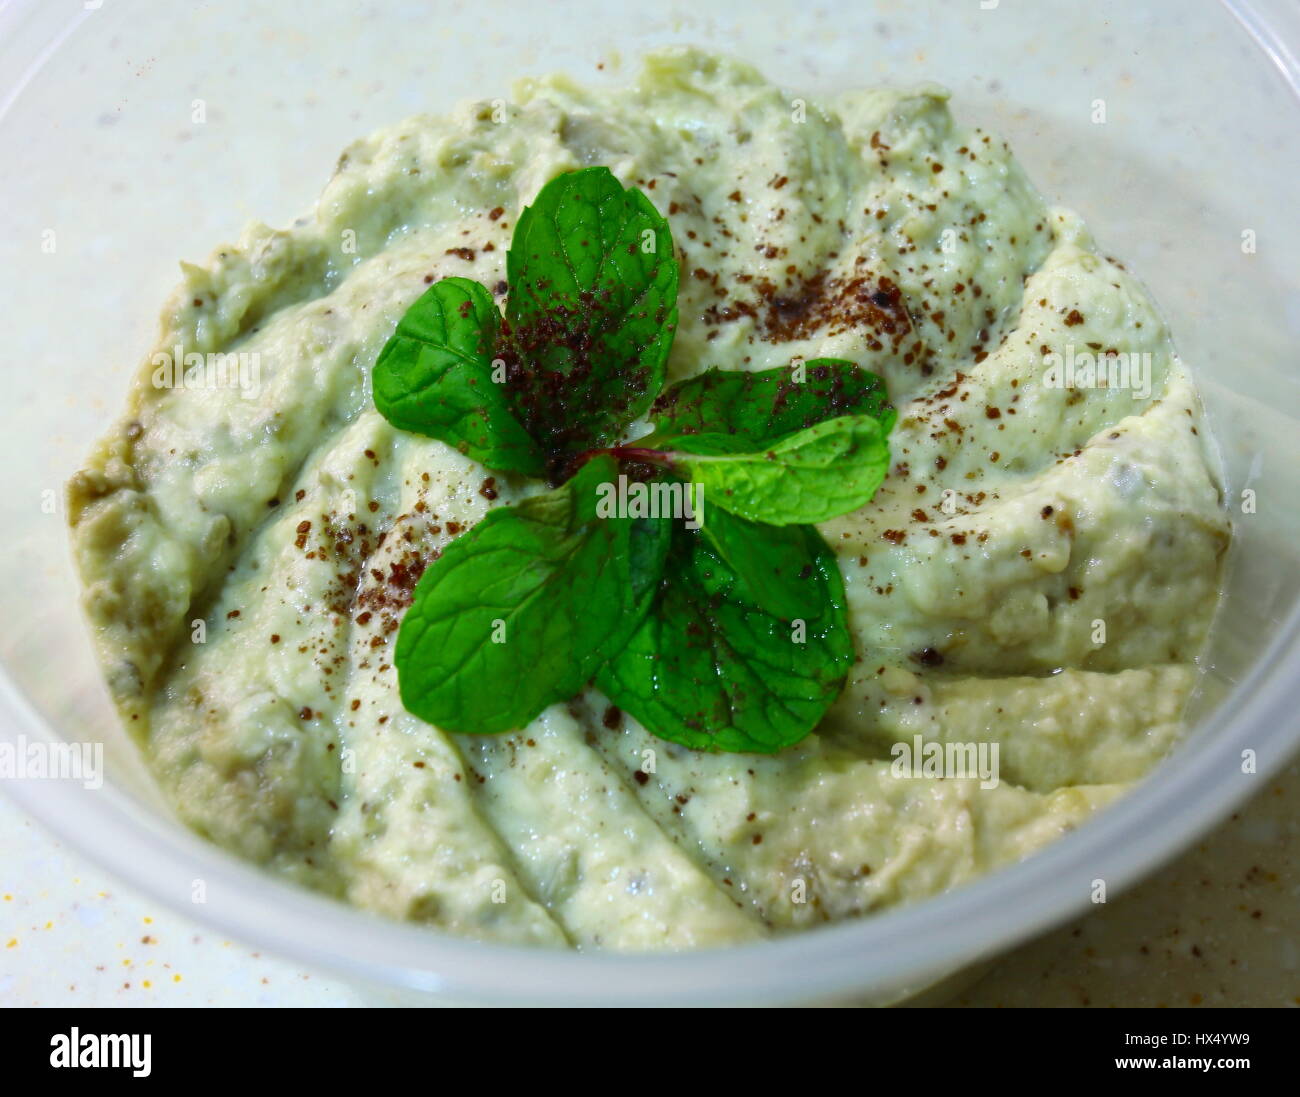 A pot of Lebanese Arab mutabal dip, or baba ganoush,made from tahini and roasted eggplant, topped with a sprig of mint and a sprinkling of sumac Stock Photo